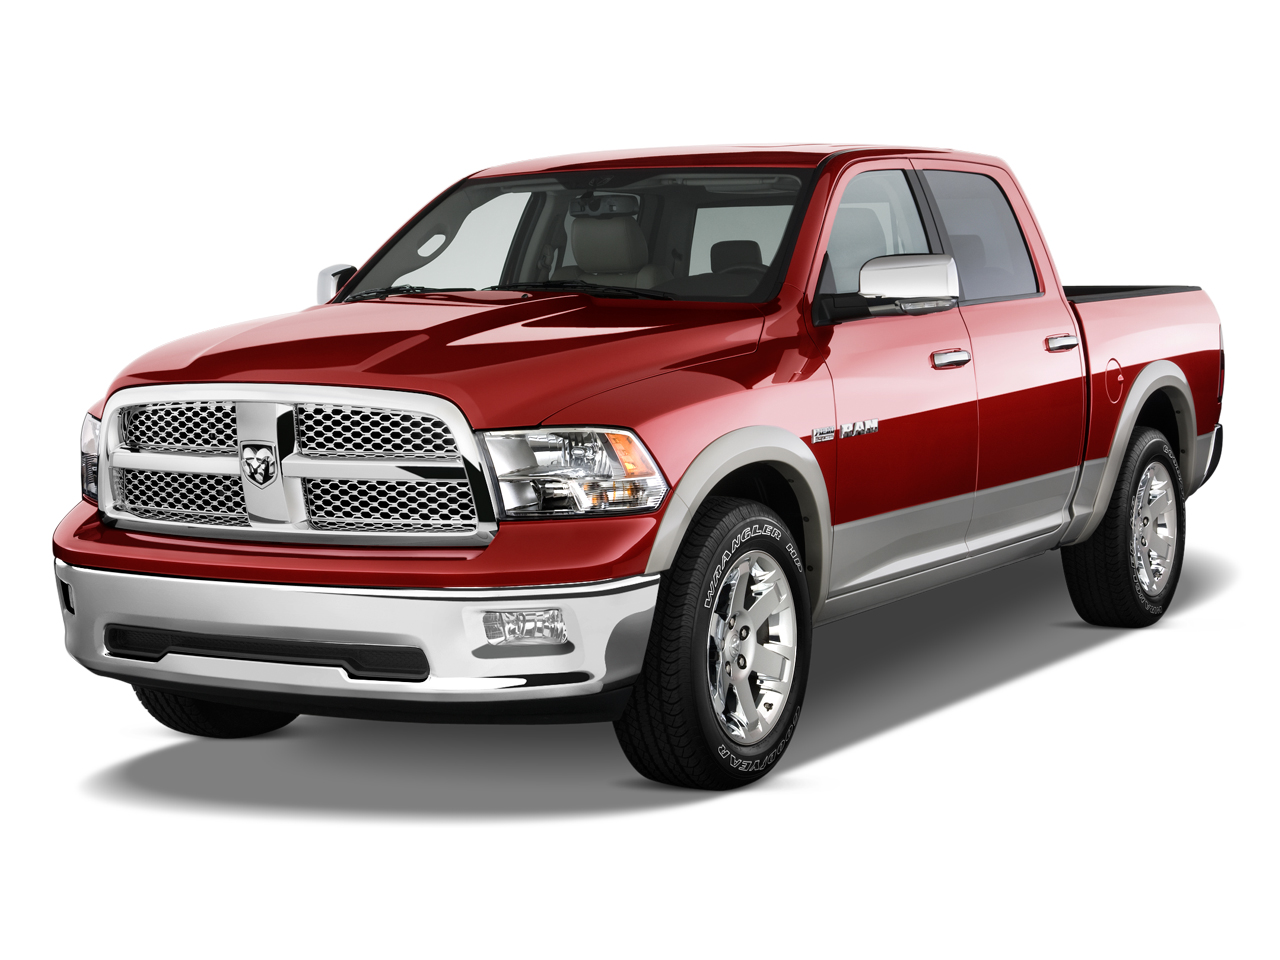 2011 Ram 1500 Review, Ratings, Specs, Prices, and Photos - The Car Connection